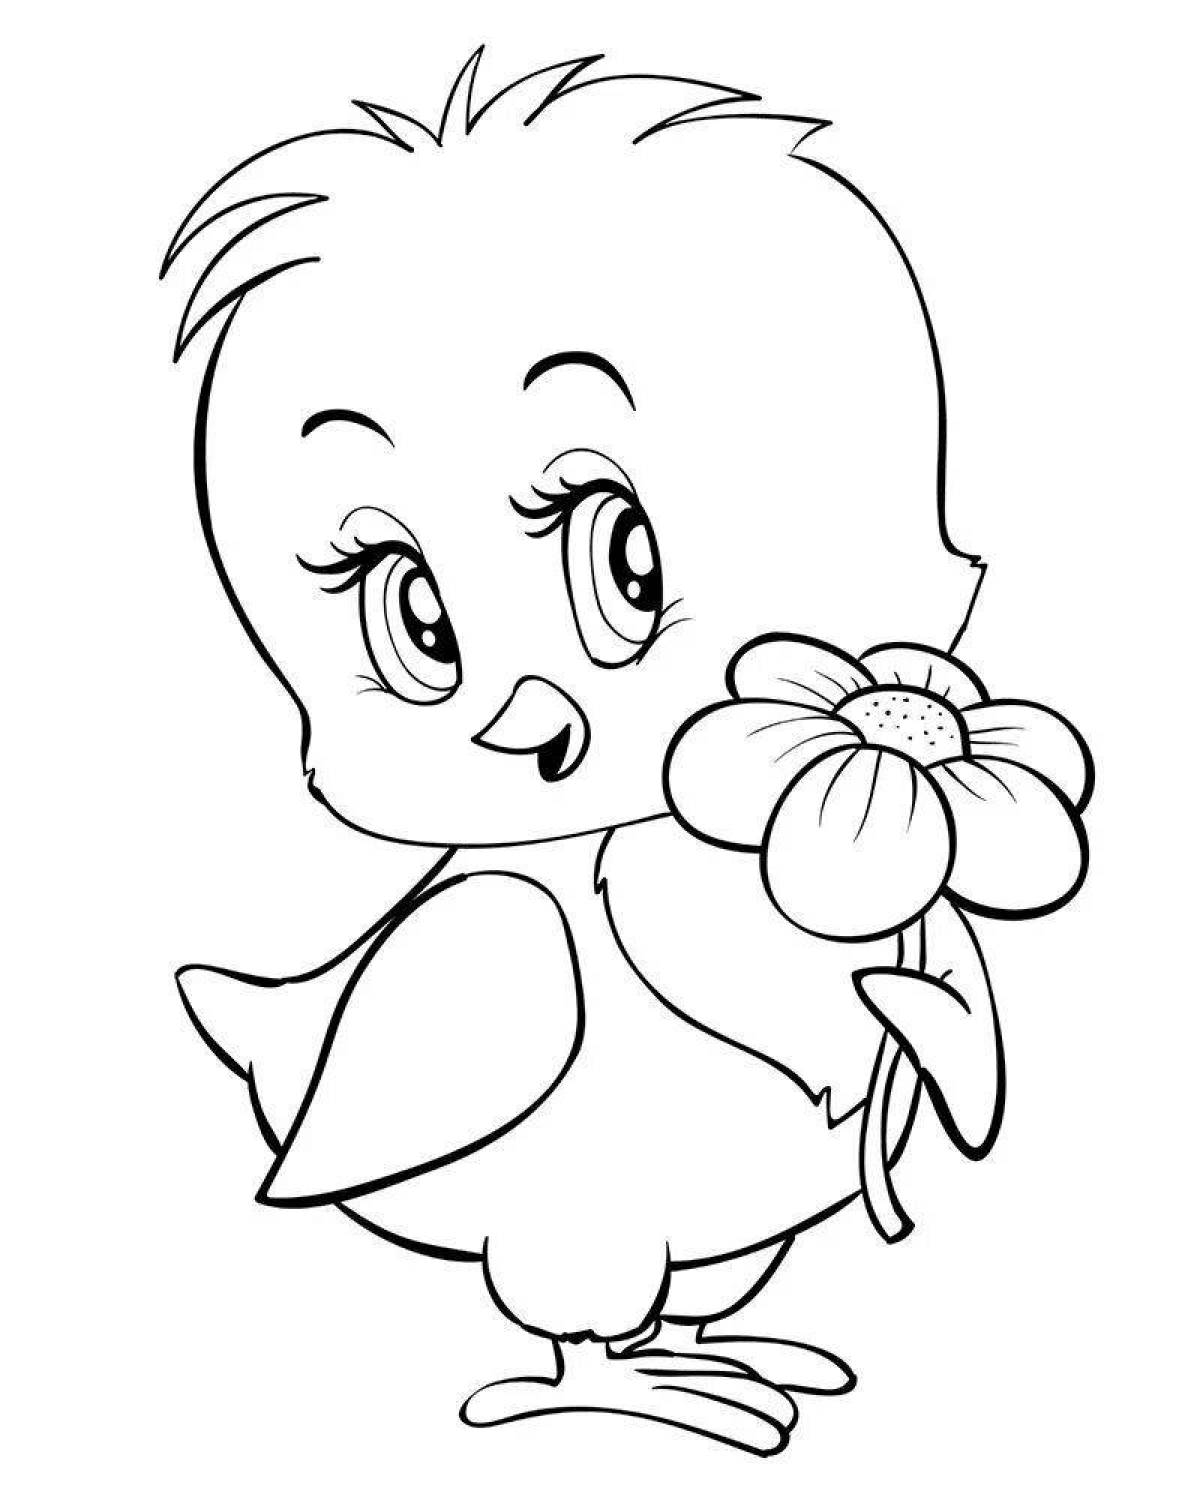 Cute chick and duck coloring book